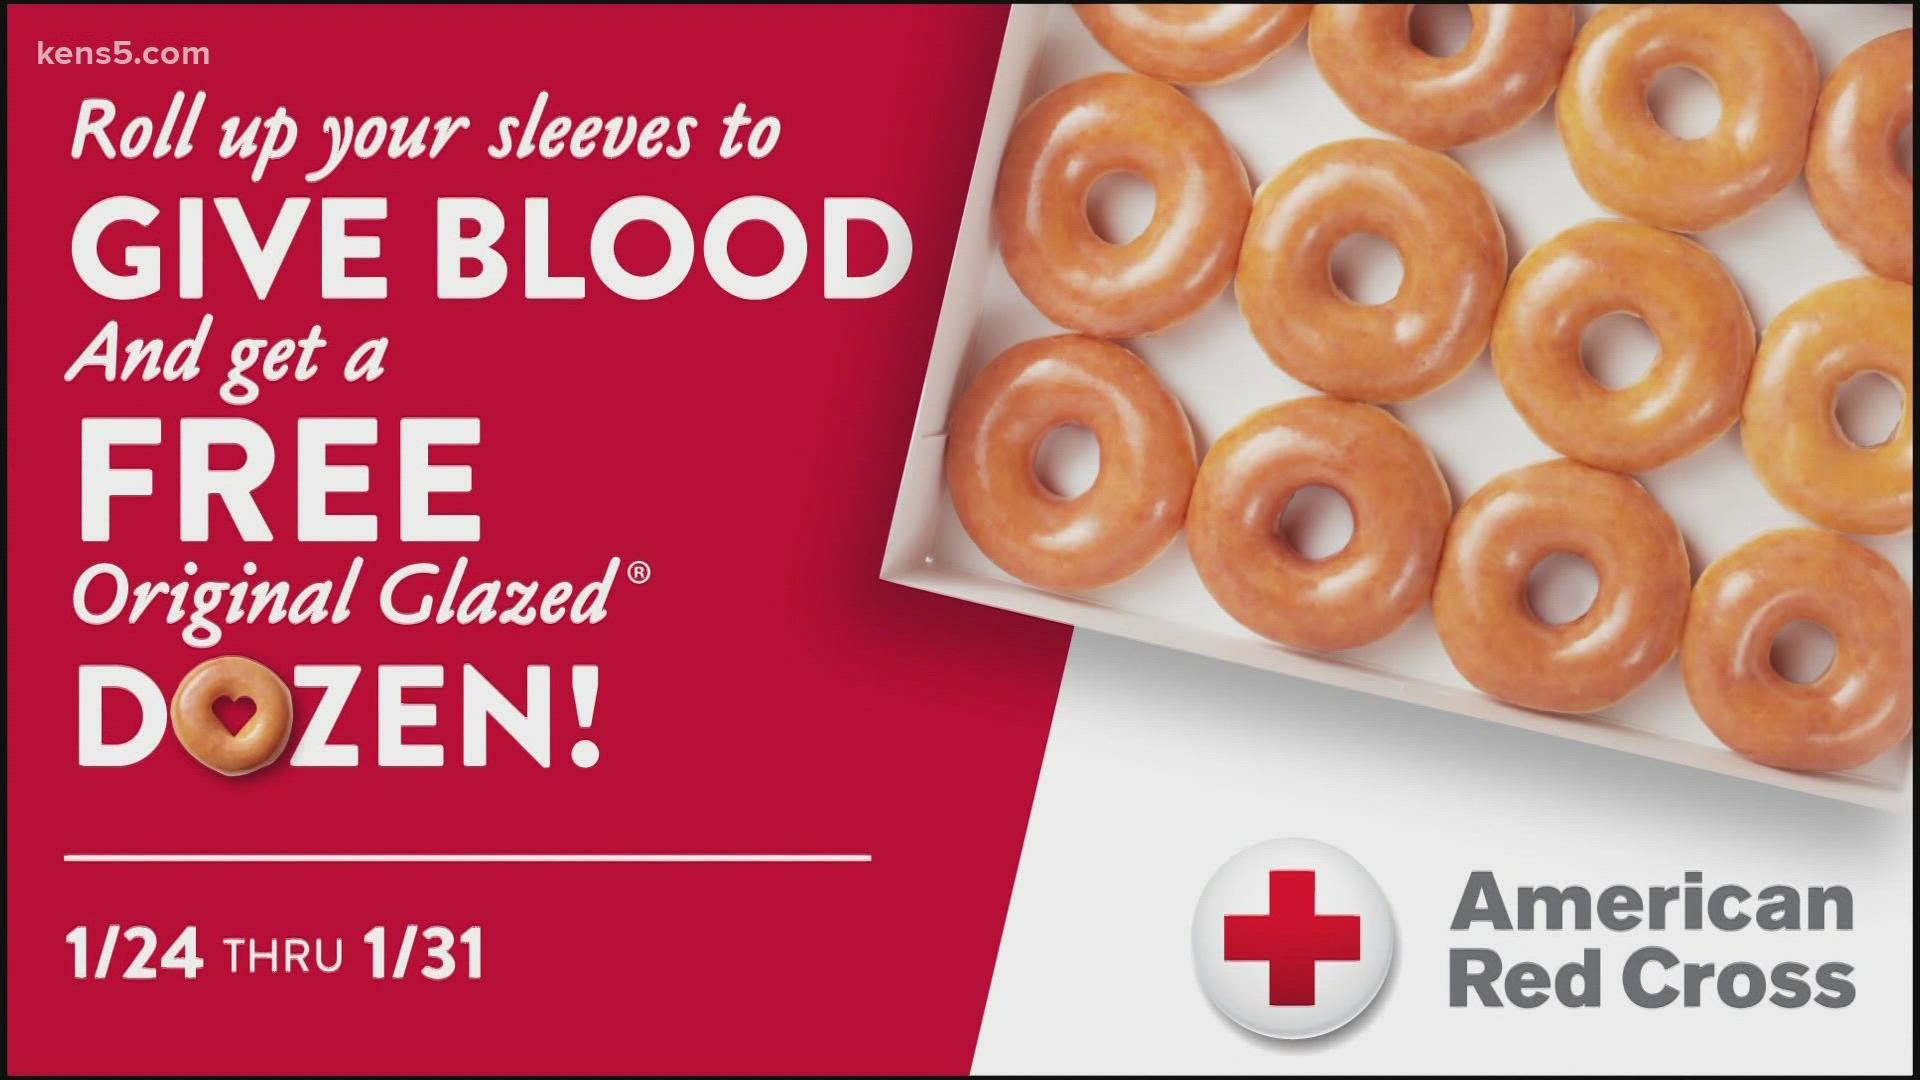 With a nationwide shortage of blood donations, Krispy Kreme is offering free donuts if you donate blood.